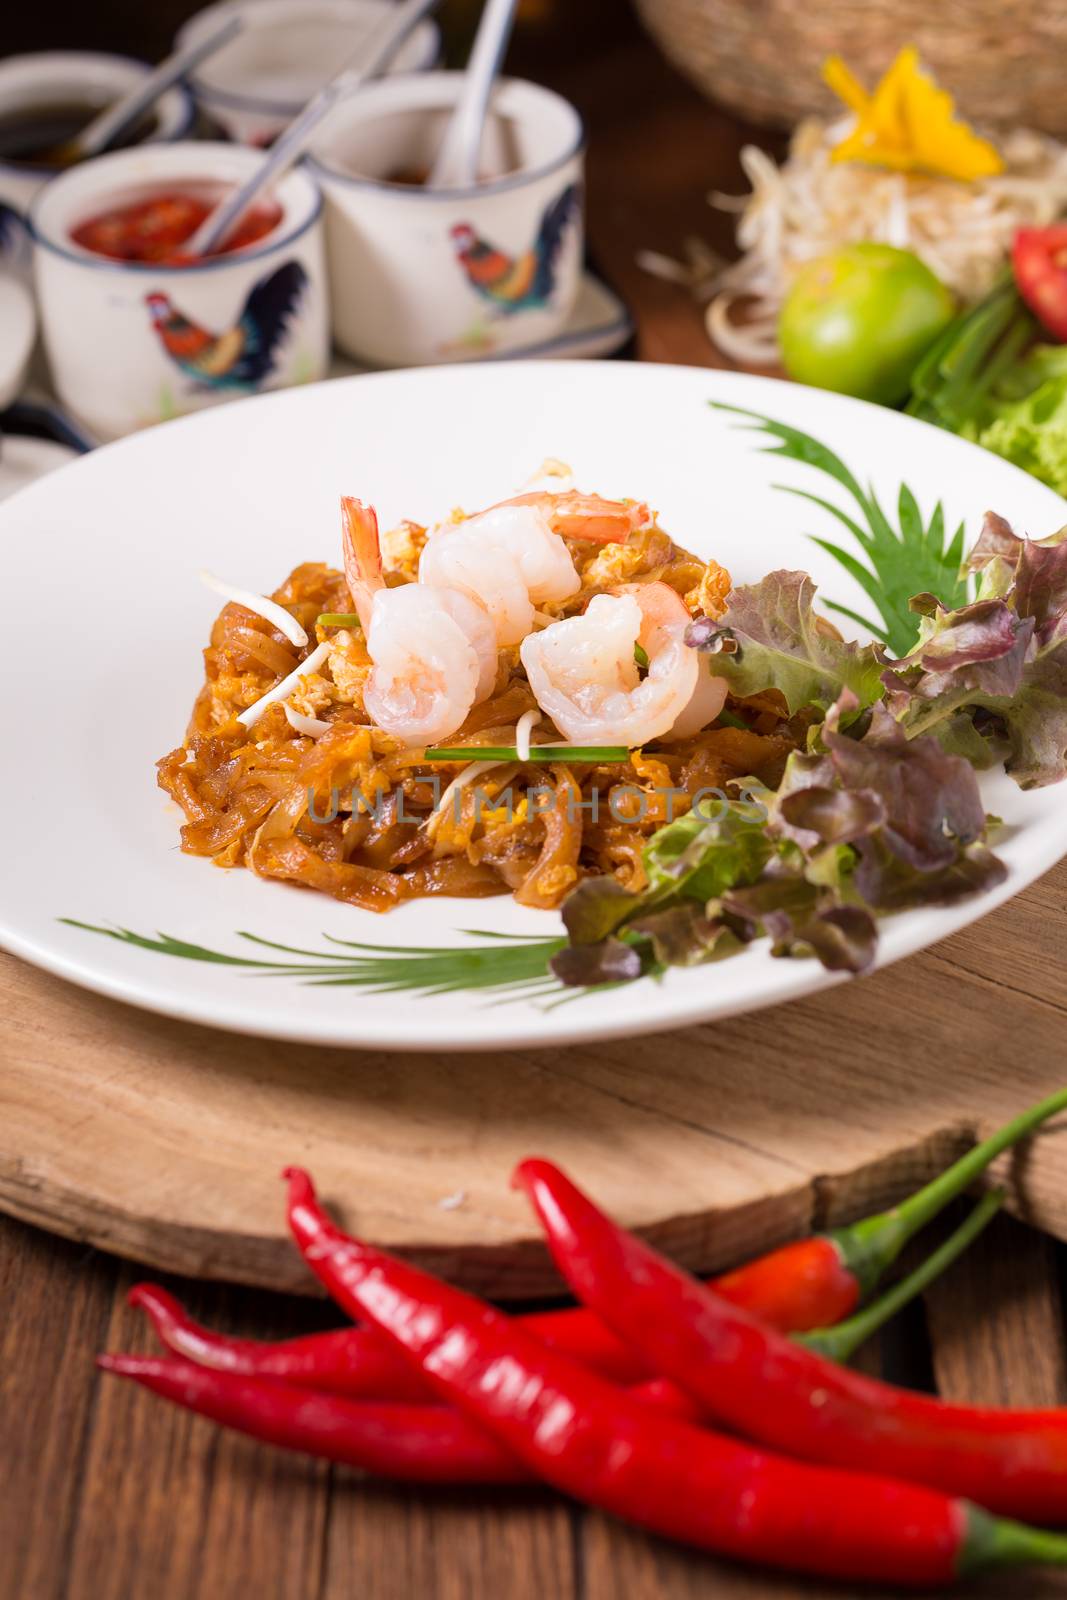 Fried noodle Thai style with prawns Stir fry noodles with shrimp by kaiskynet